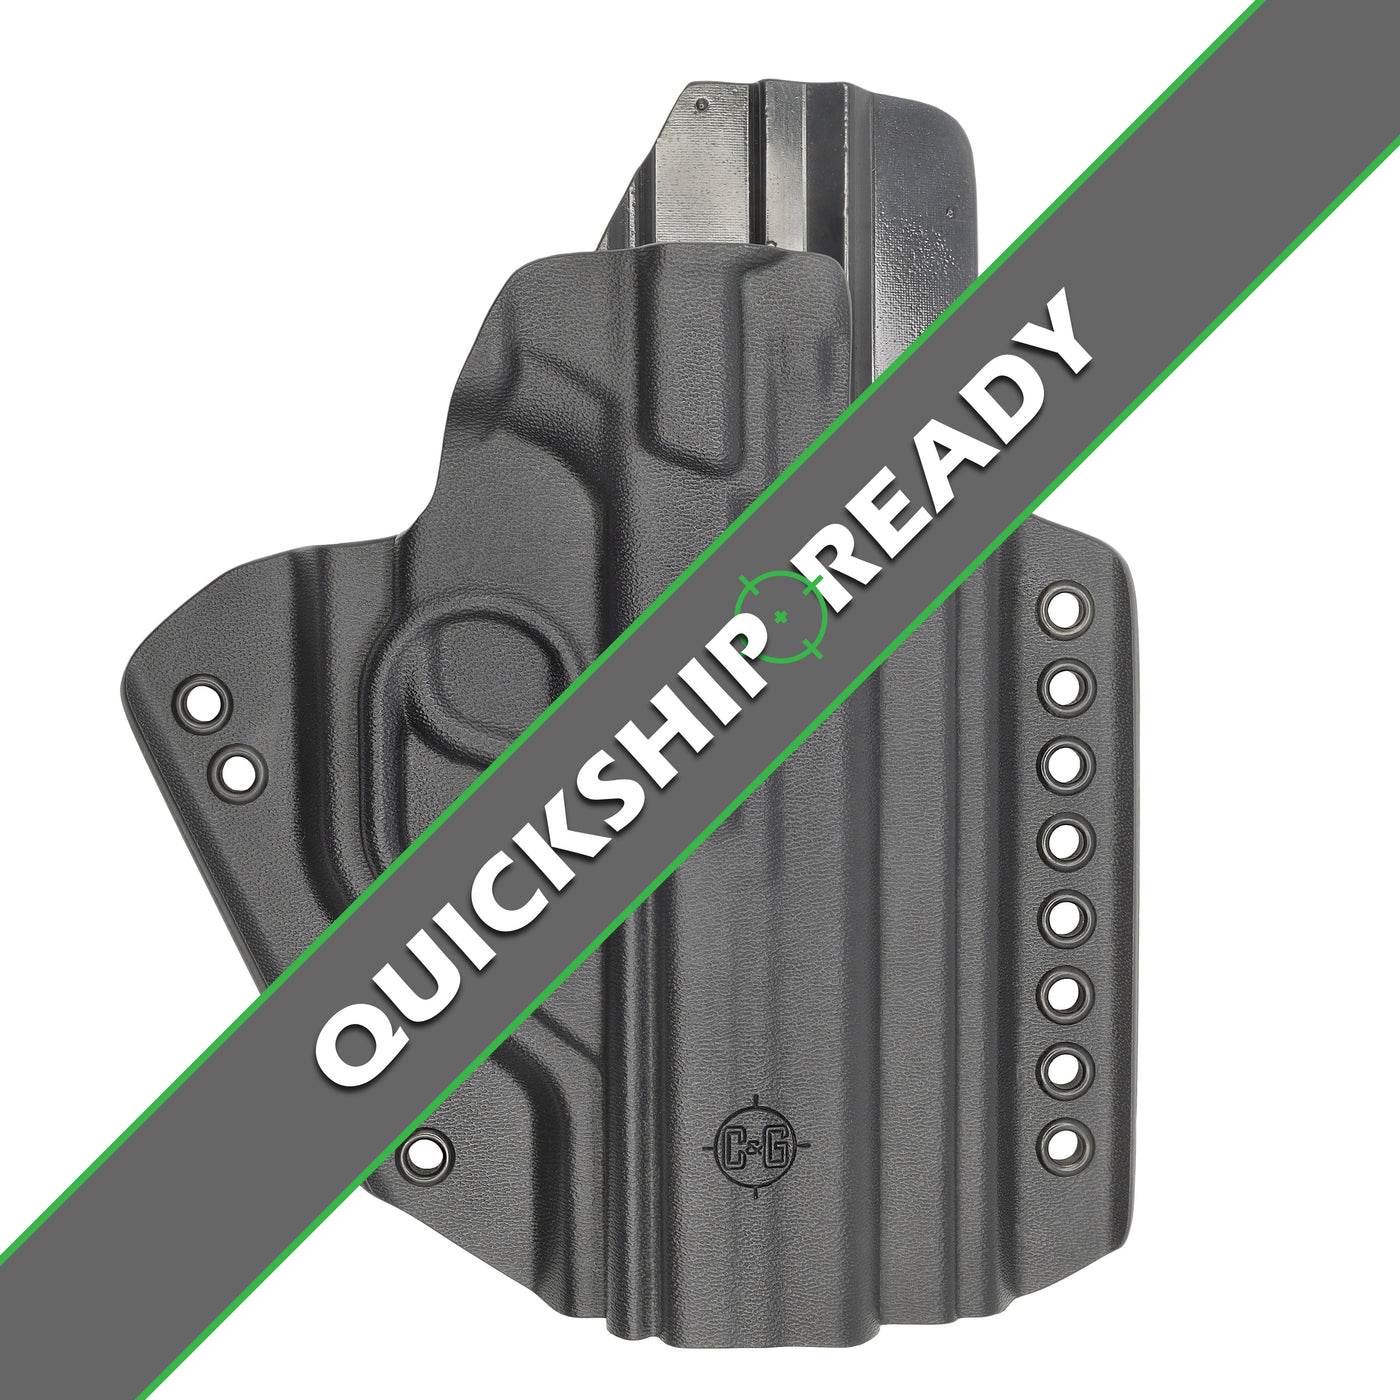 C&G Holsters quickship chest mounted system S&W M&P 9/40